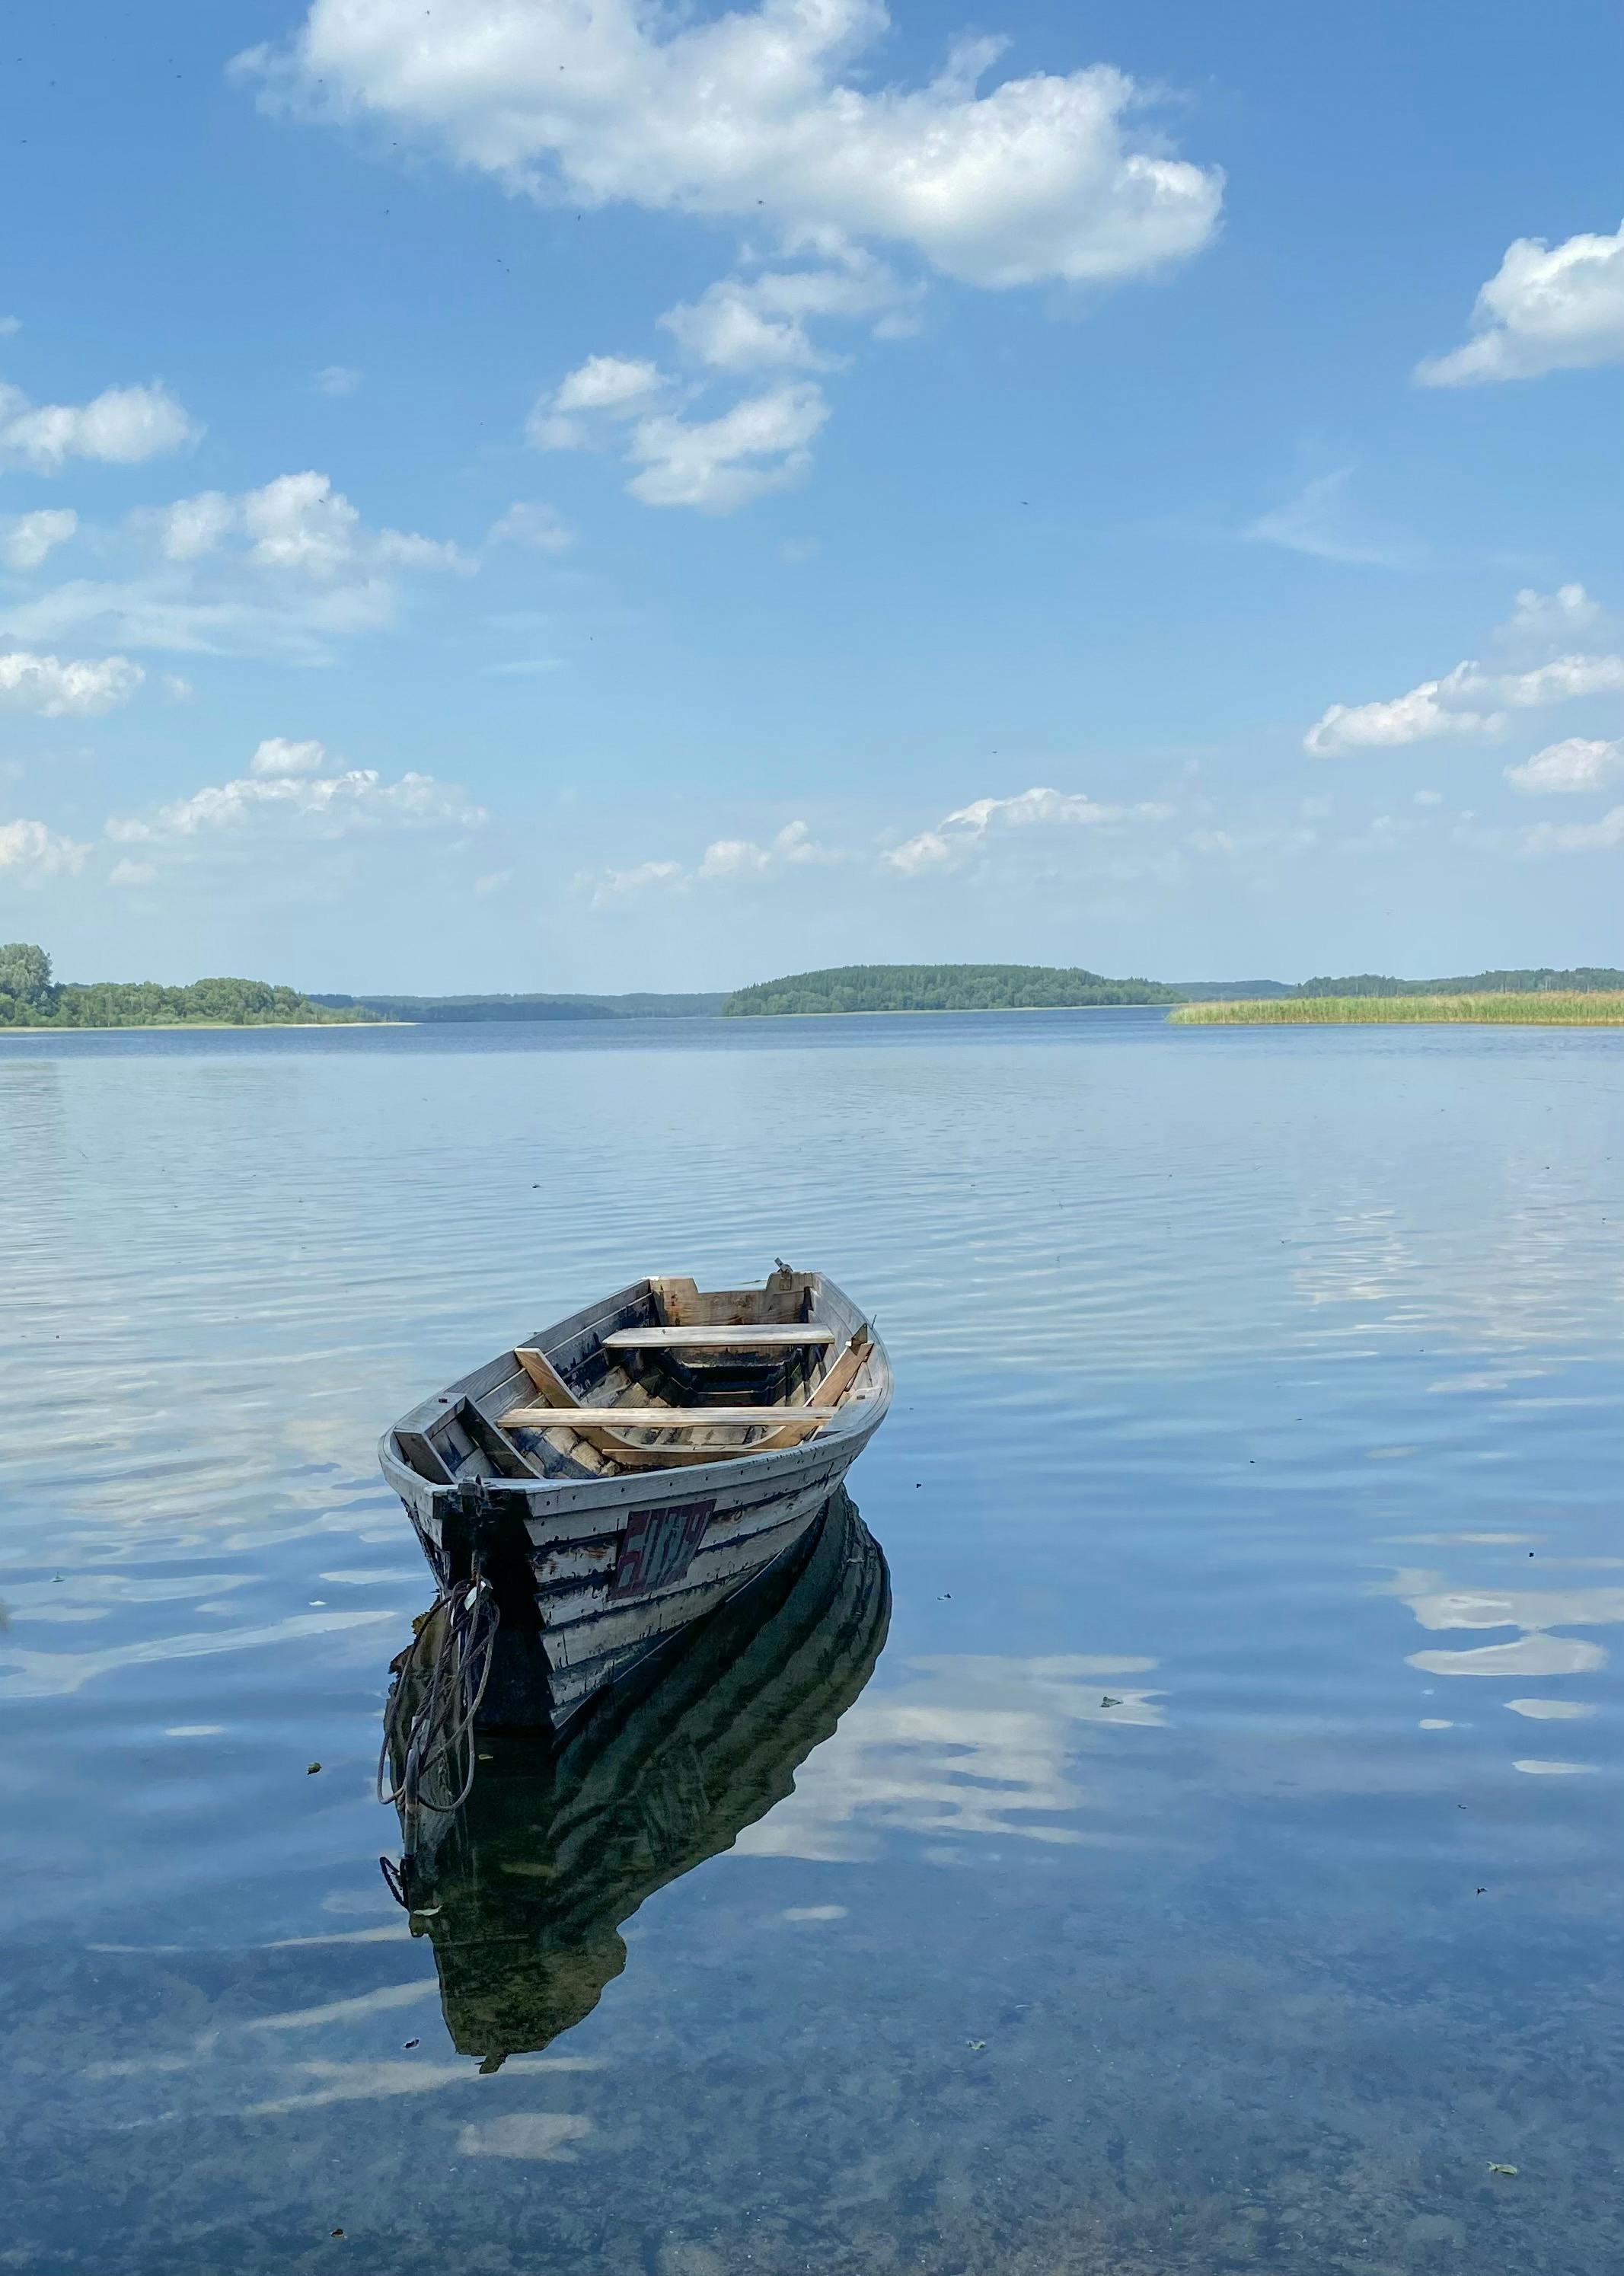 Small Wooden Boat From Aft Horizon Connected With Sky Stock Photo -  Download Image Now - iStock